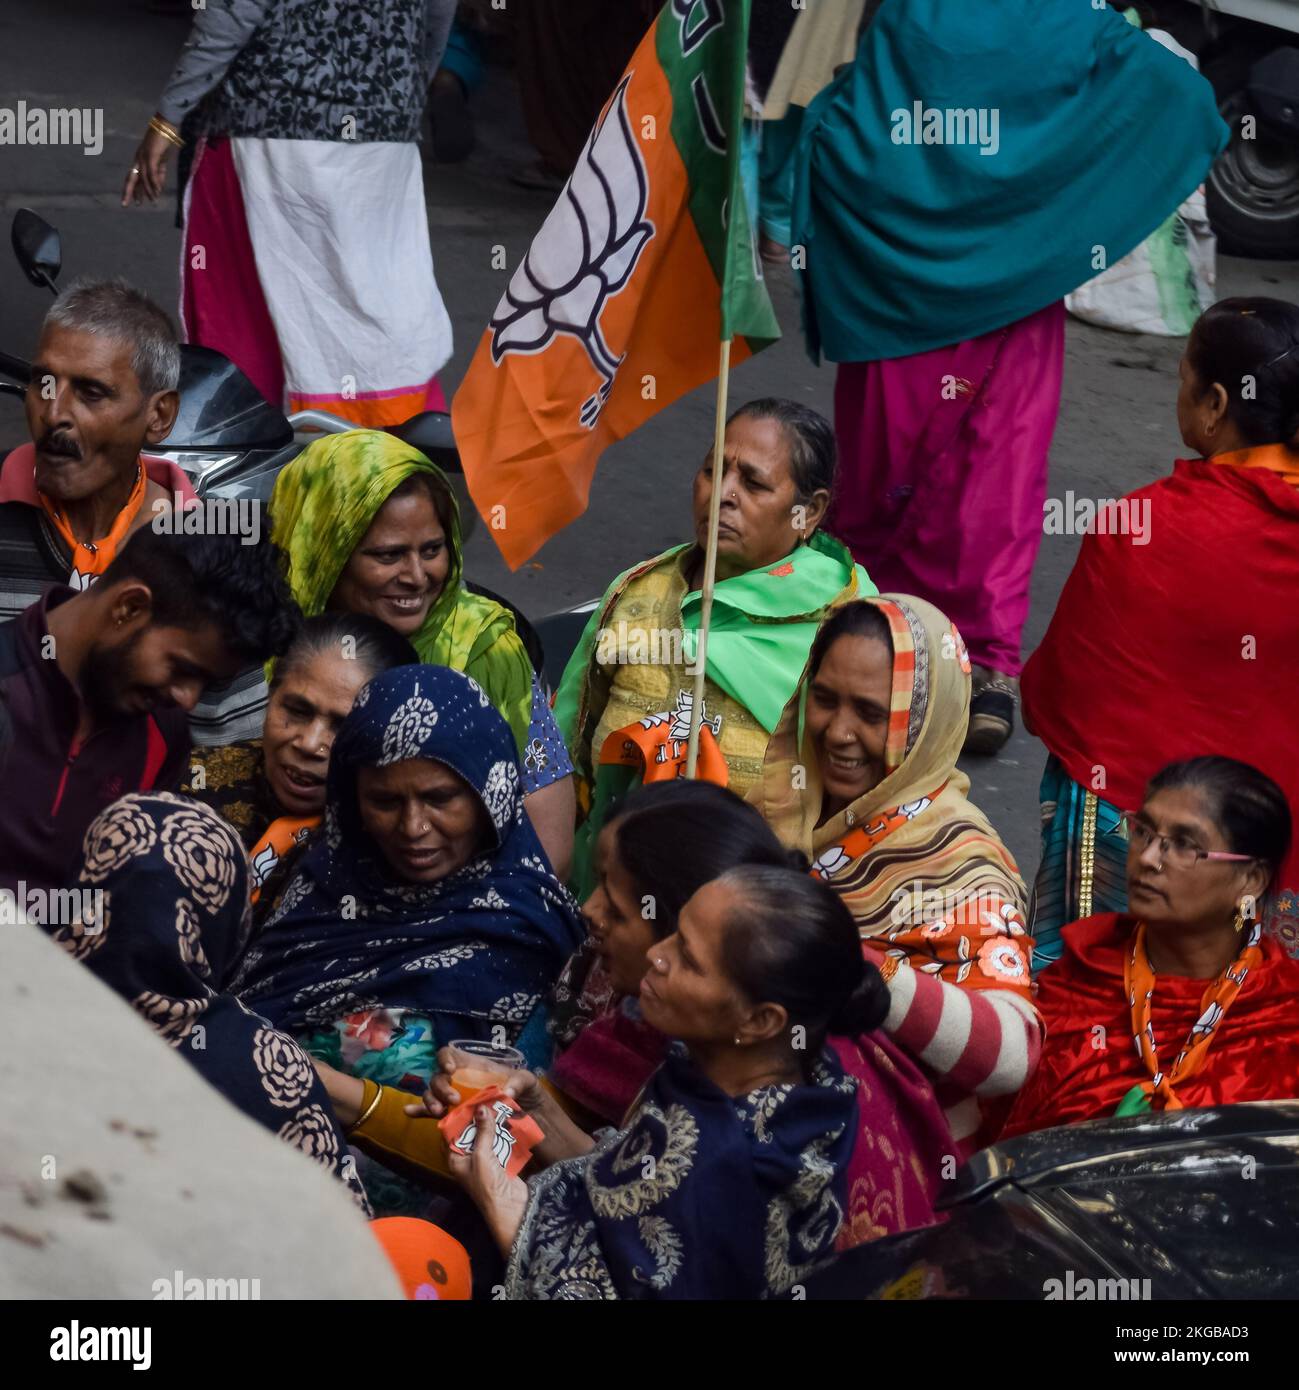 New Delhi, India, November 20 2022 - Bharatiya Janata Party (BJP) supporters during a rally in support of BJP candidate Pankaj Luthara to file nominat Stock Photo